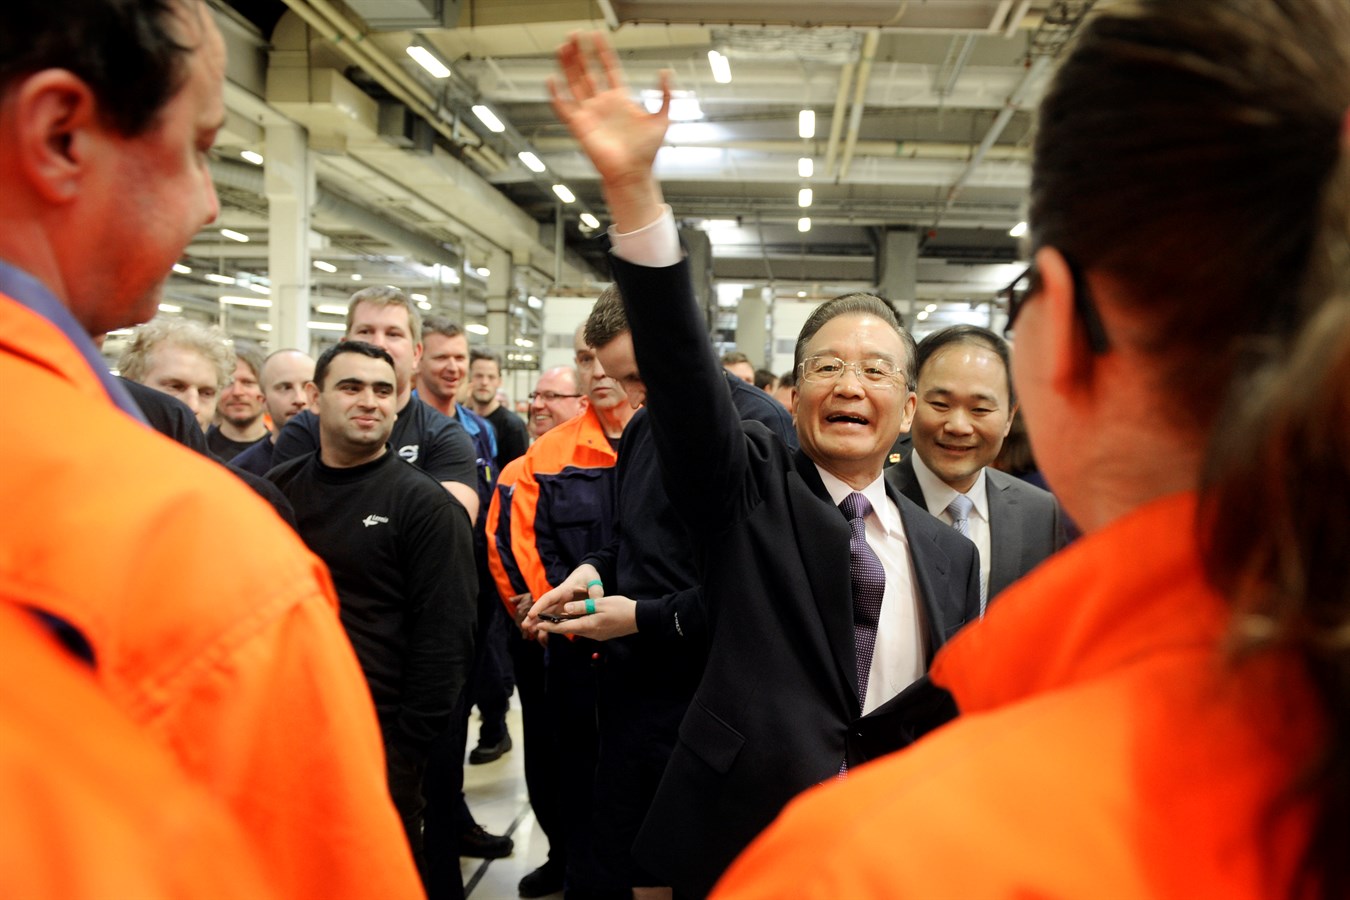 Chinese Prime Minister Wen Jiabao visits Volvo Car Corporation in Gothenburg